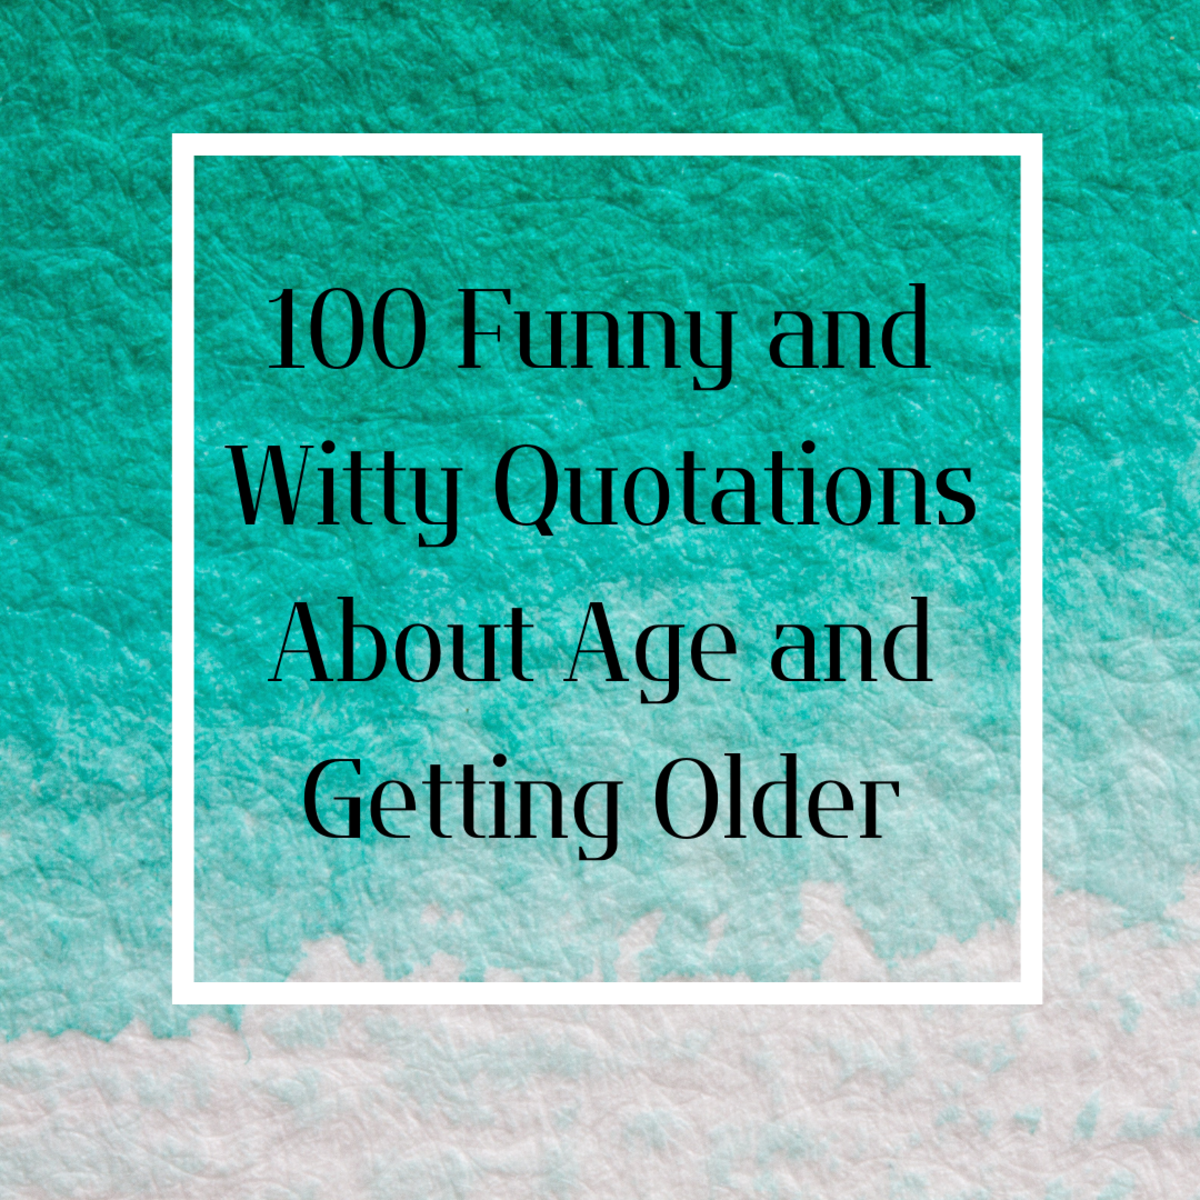 100 Funny and Witty Quotations About Age and Getting Older